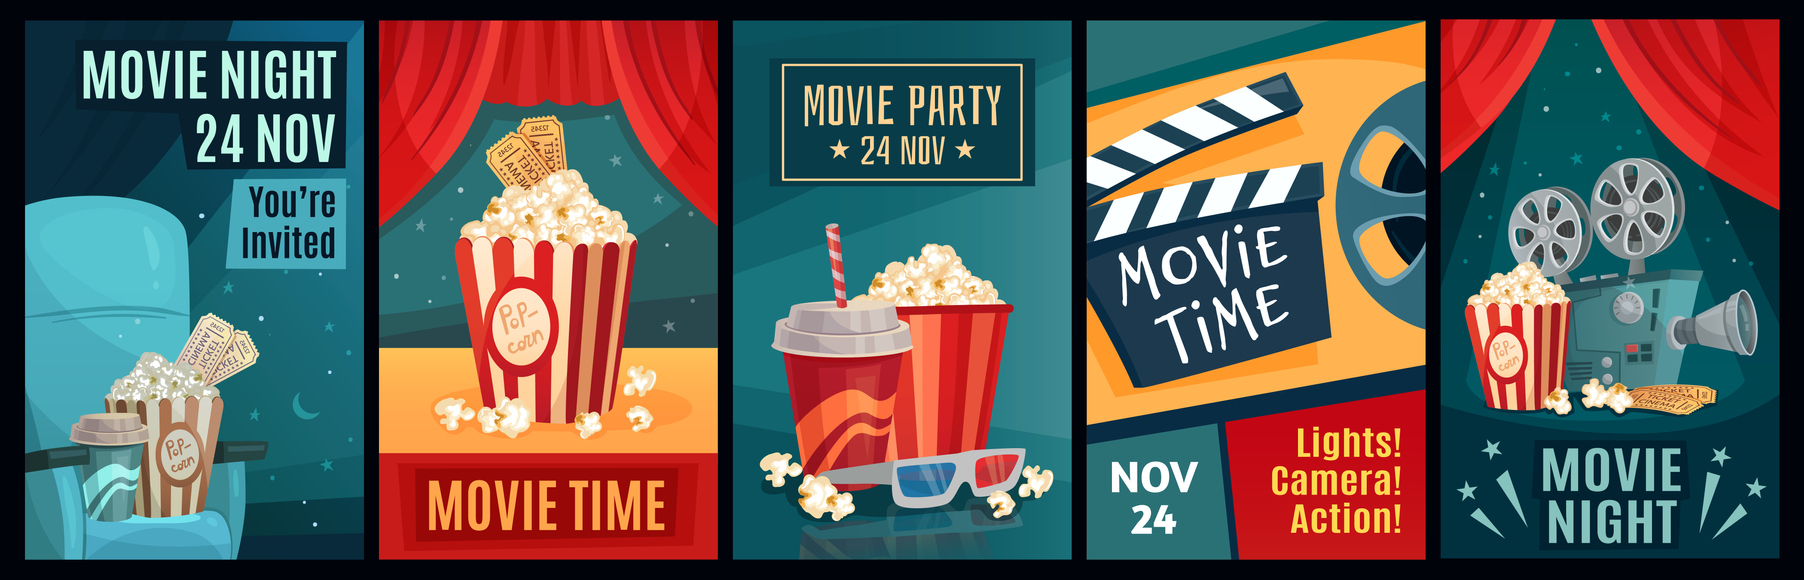 Cinema poster. Night film movies, popcorn and retro movie posters template vector illustration set